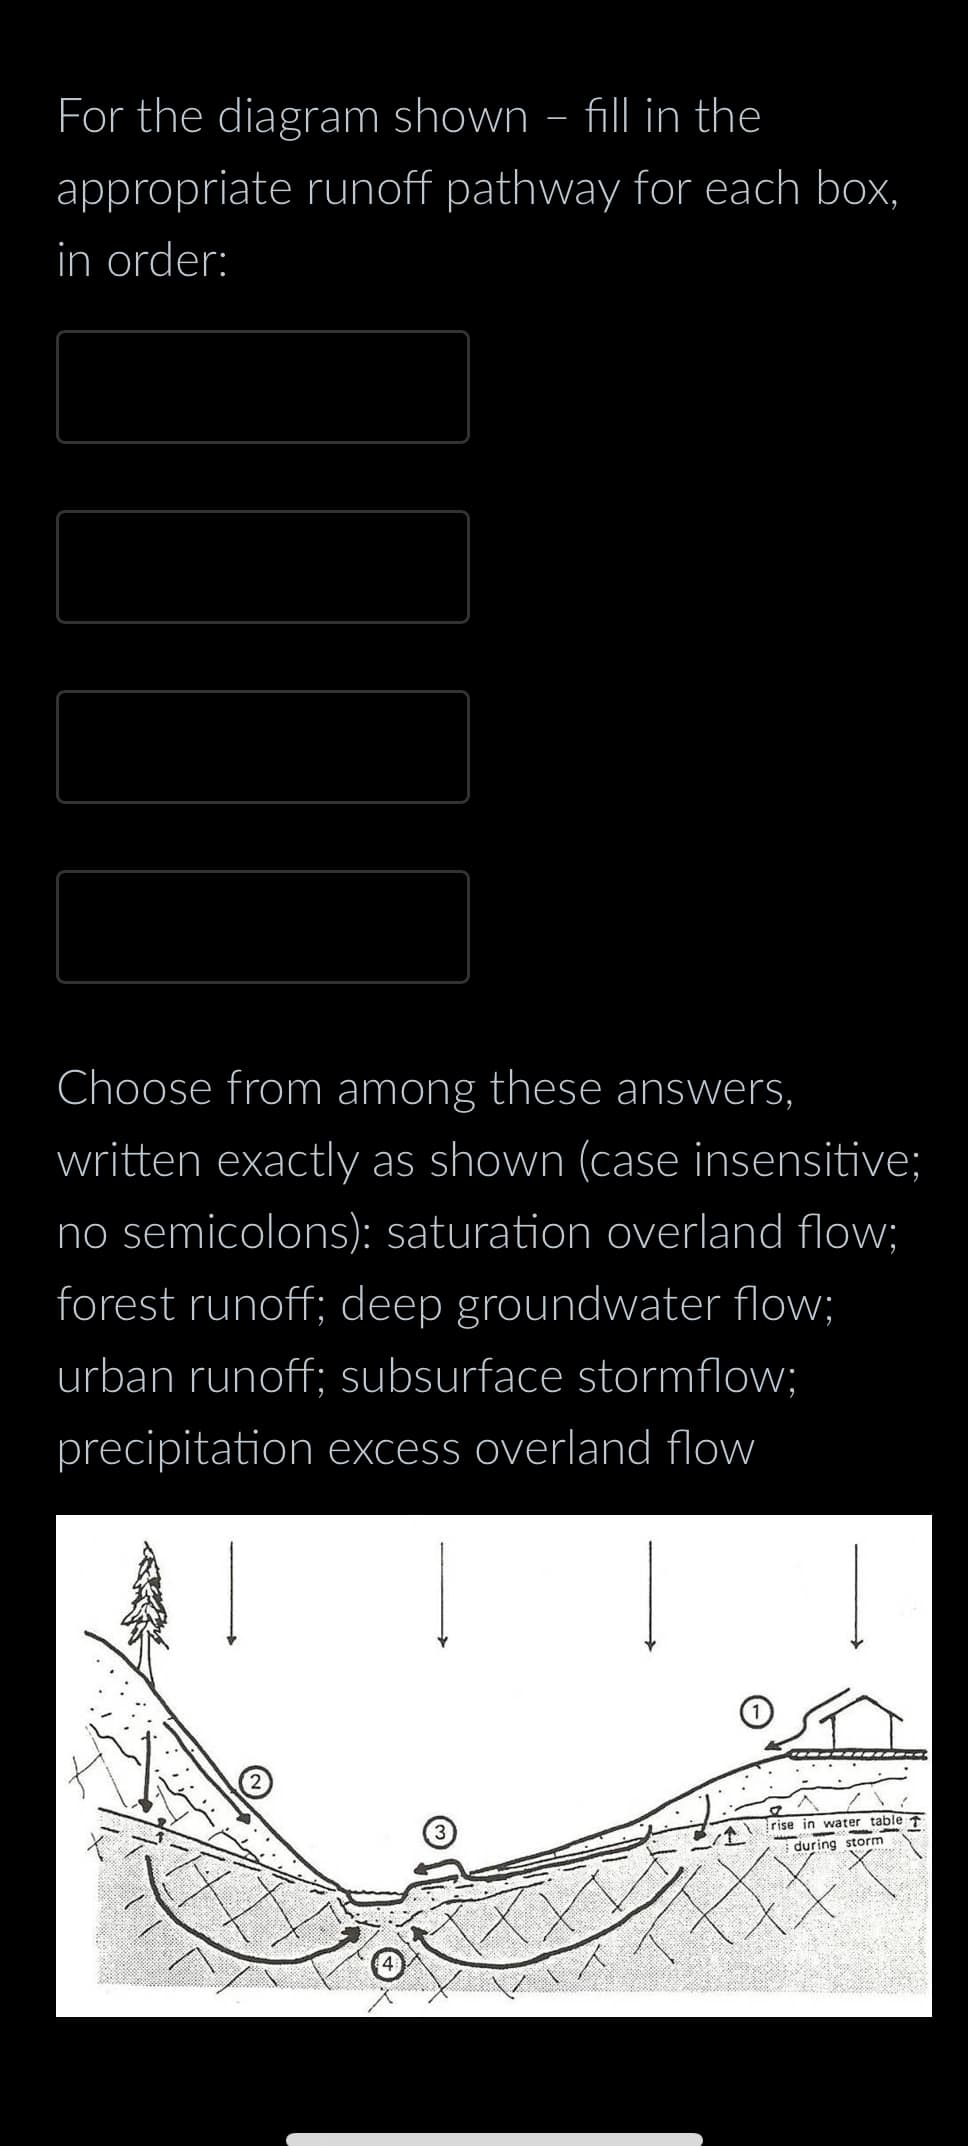 For the diagram shown – fill in the
appropriate runoff pathway for each box,
in order:
Choose from among these answers,
written exactly as shown (case insensitive;
no semicolons): saturation overland flow;
forest runoff; deep groundwater flow;
urban runoff; subsurface stormflow;
precipitation excess overland flow
rise in water table T
during storm